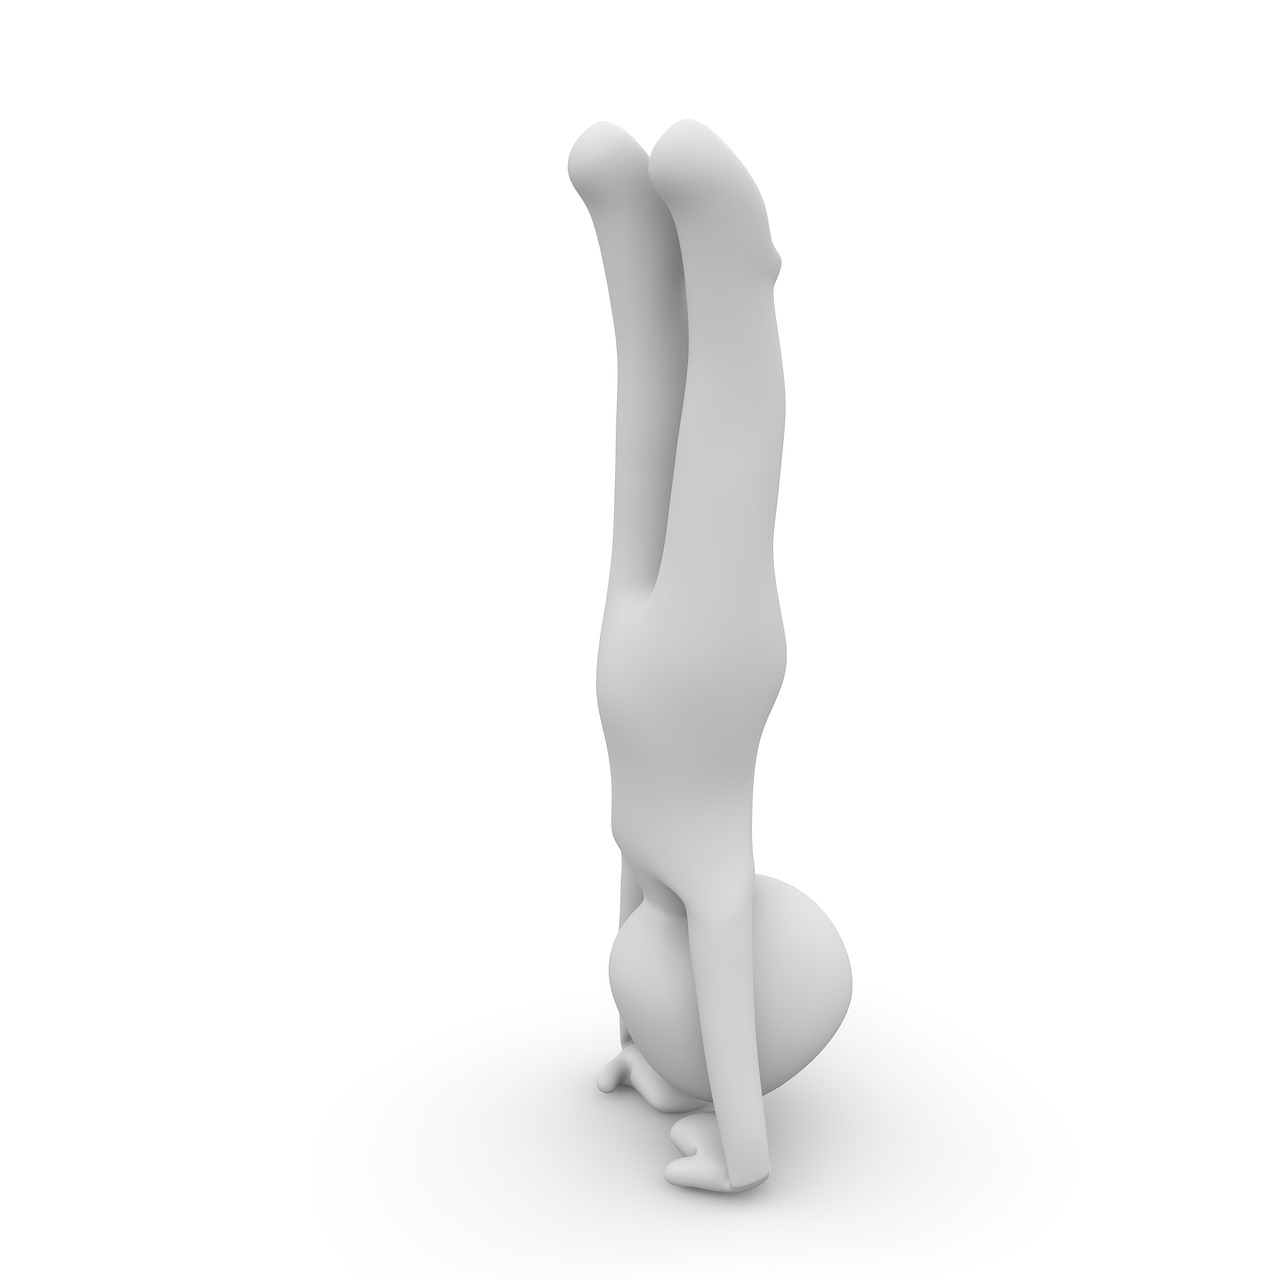 a person doing a handstand on a white surface, an ambient occlusion render, polycount, bunny leg, 3 d render of jerma 9 8 5, lowres, head is up